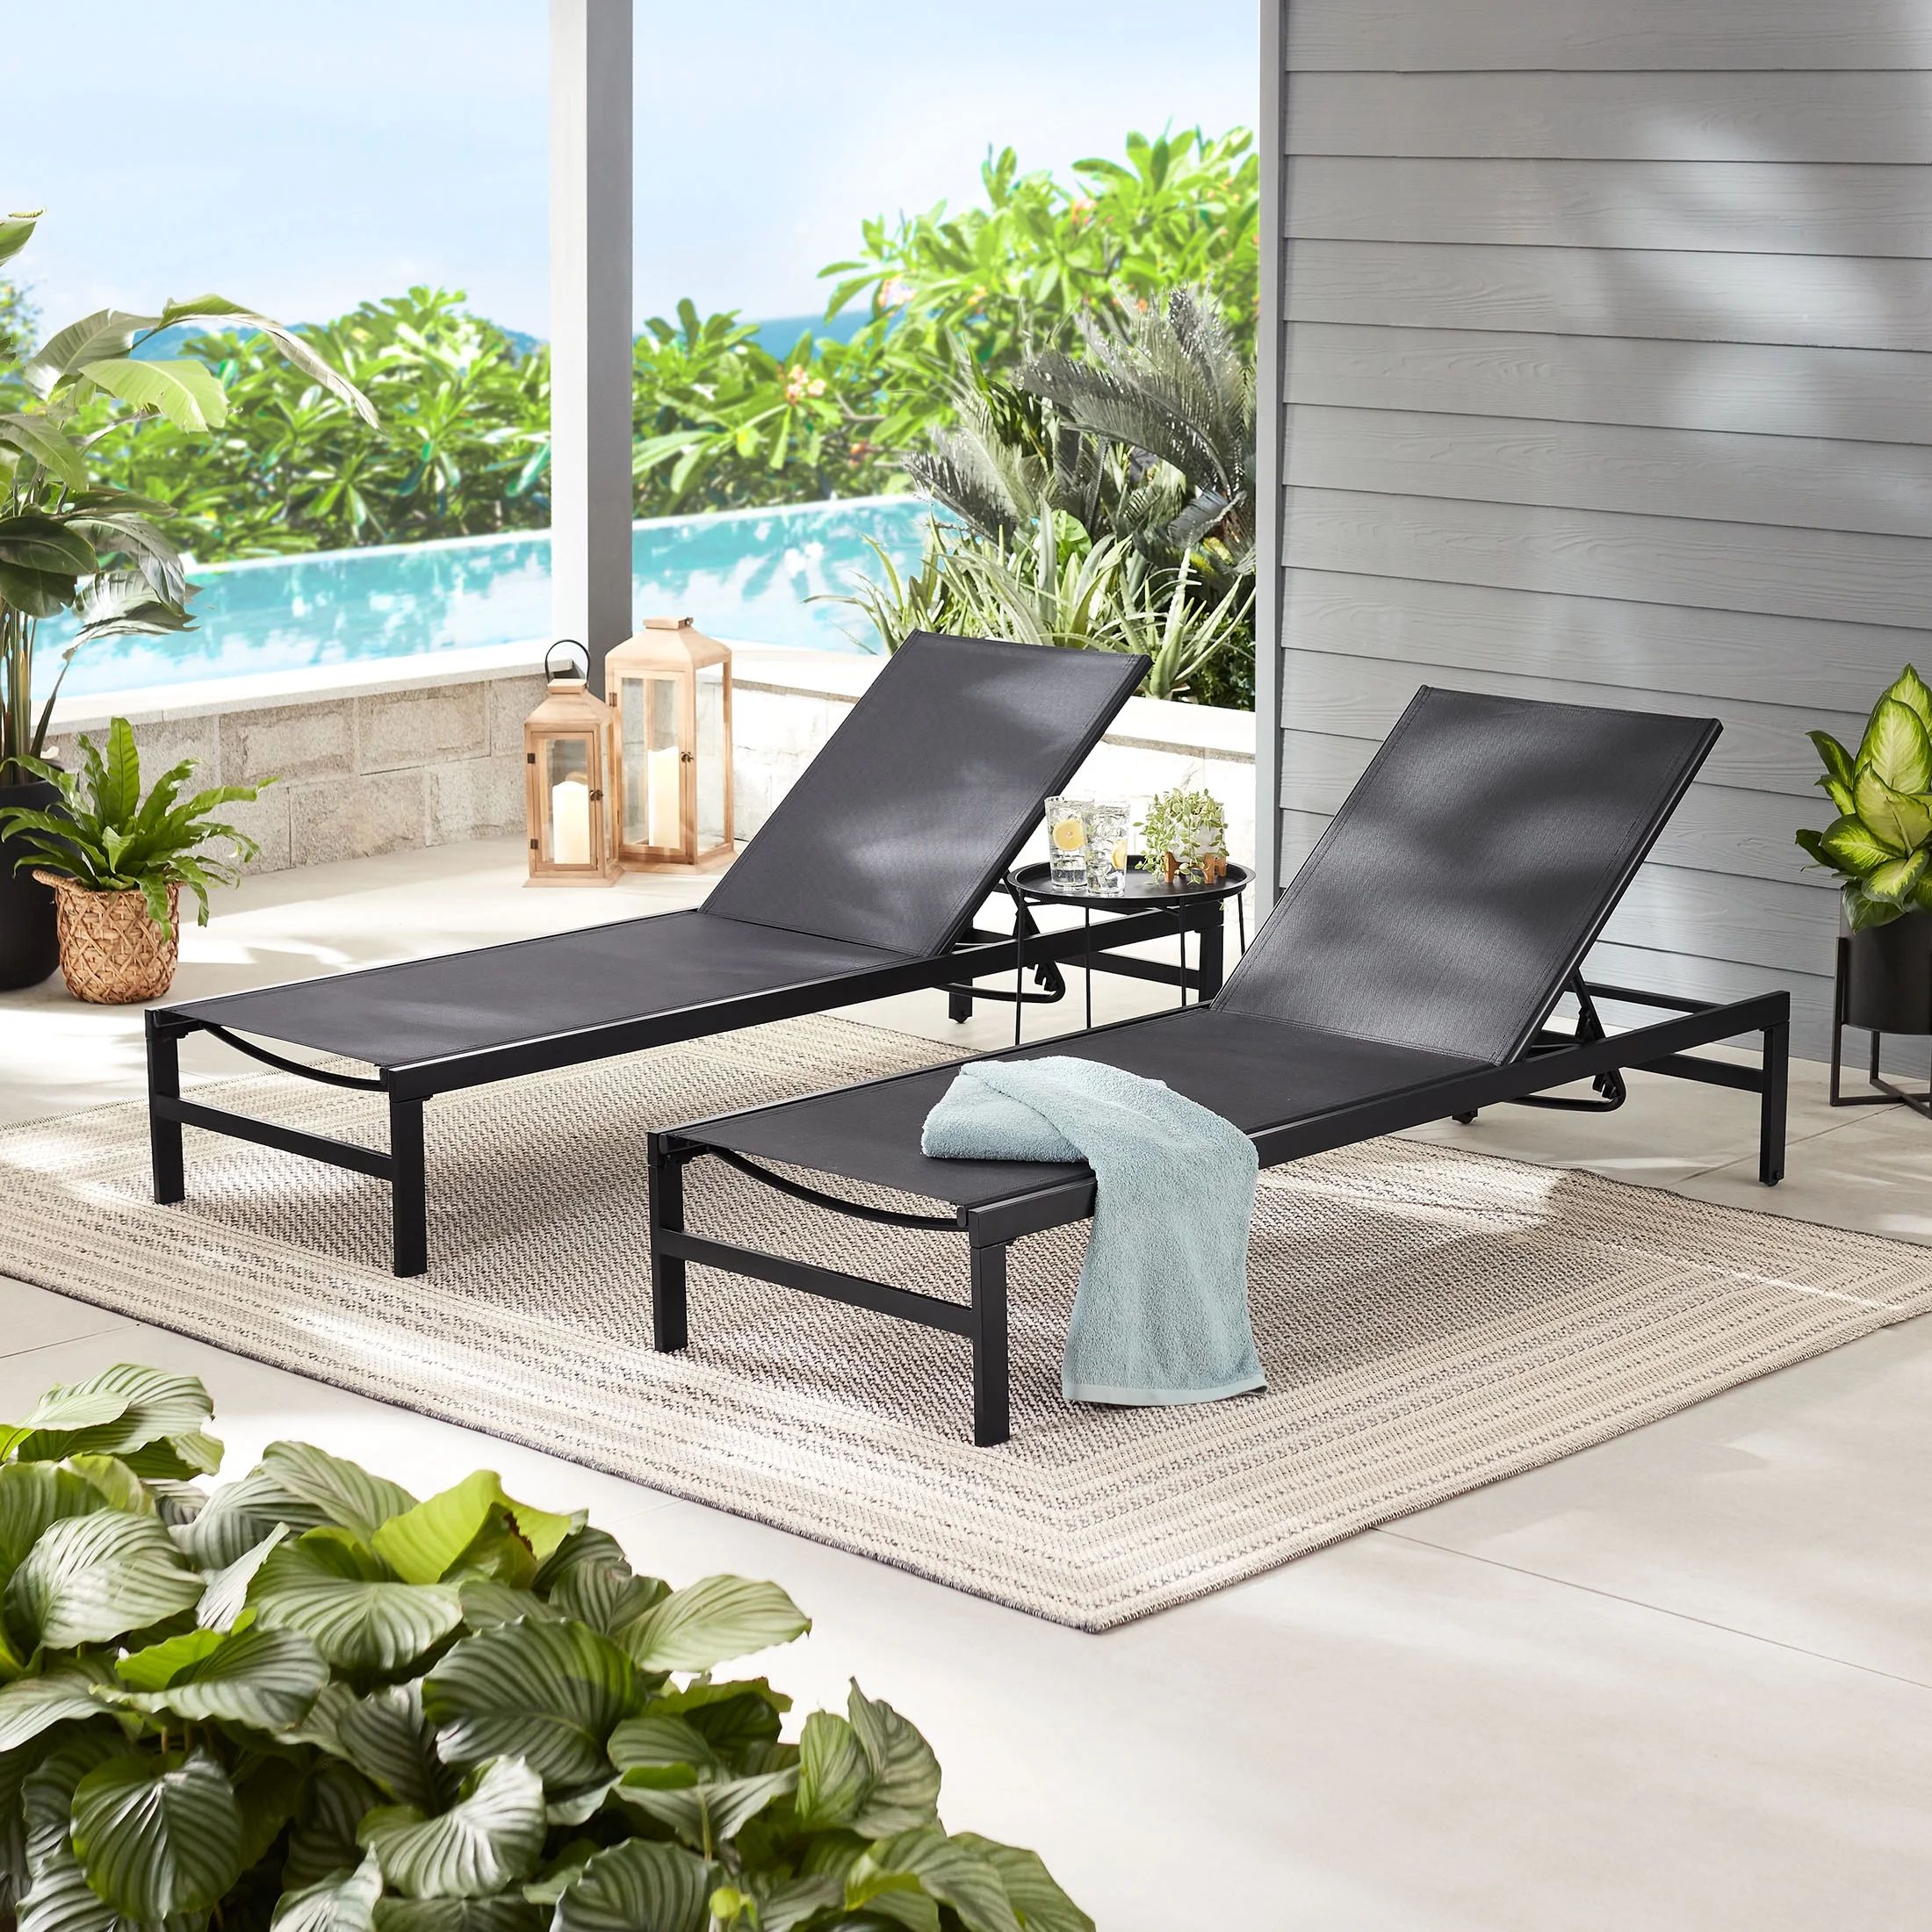 Mainstays Outdoor Sling Chaise Lounger 2-Pack, Black | Walmart (US)